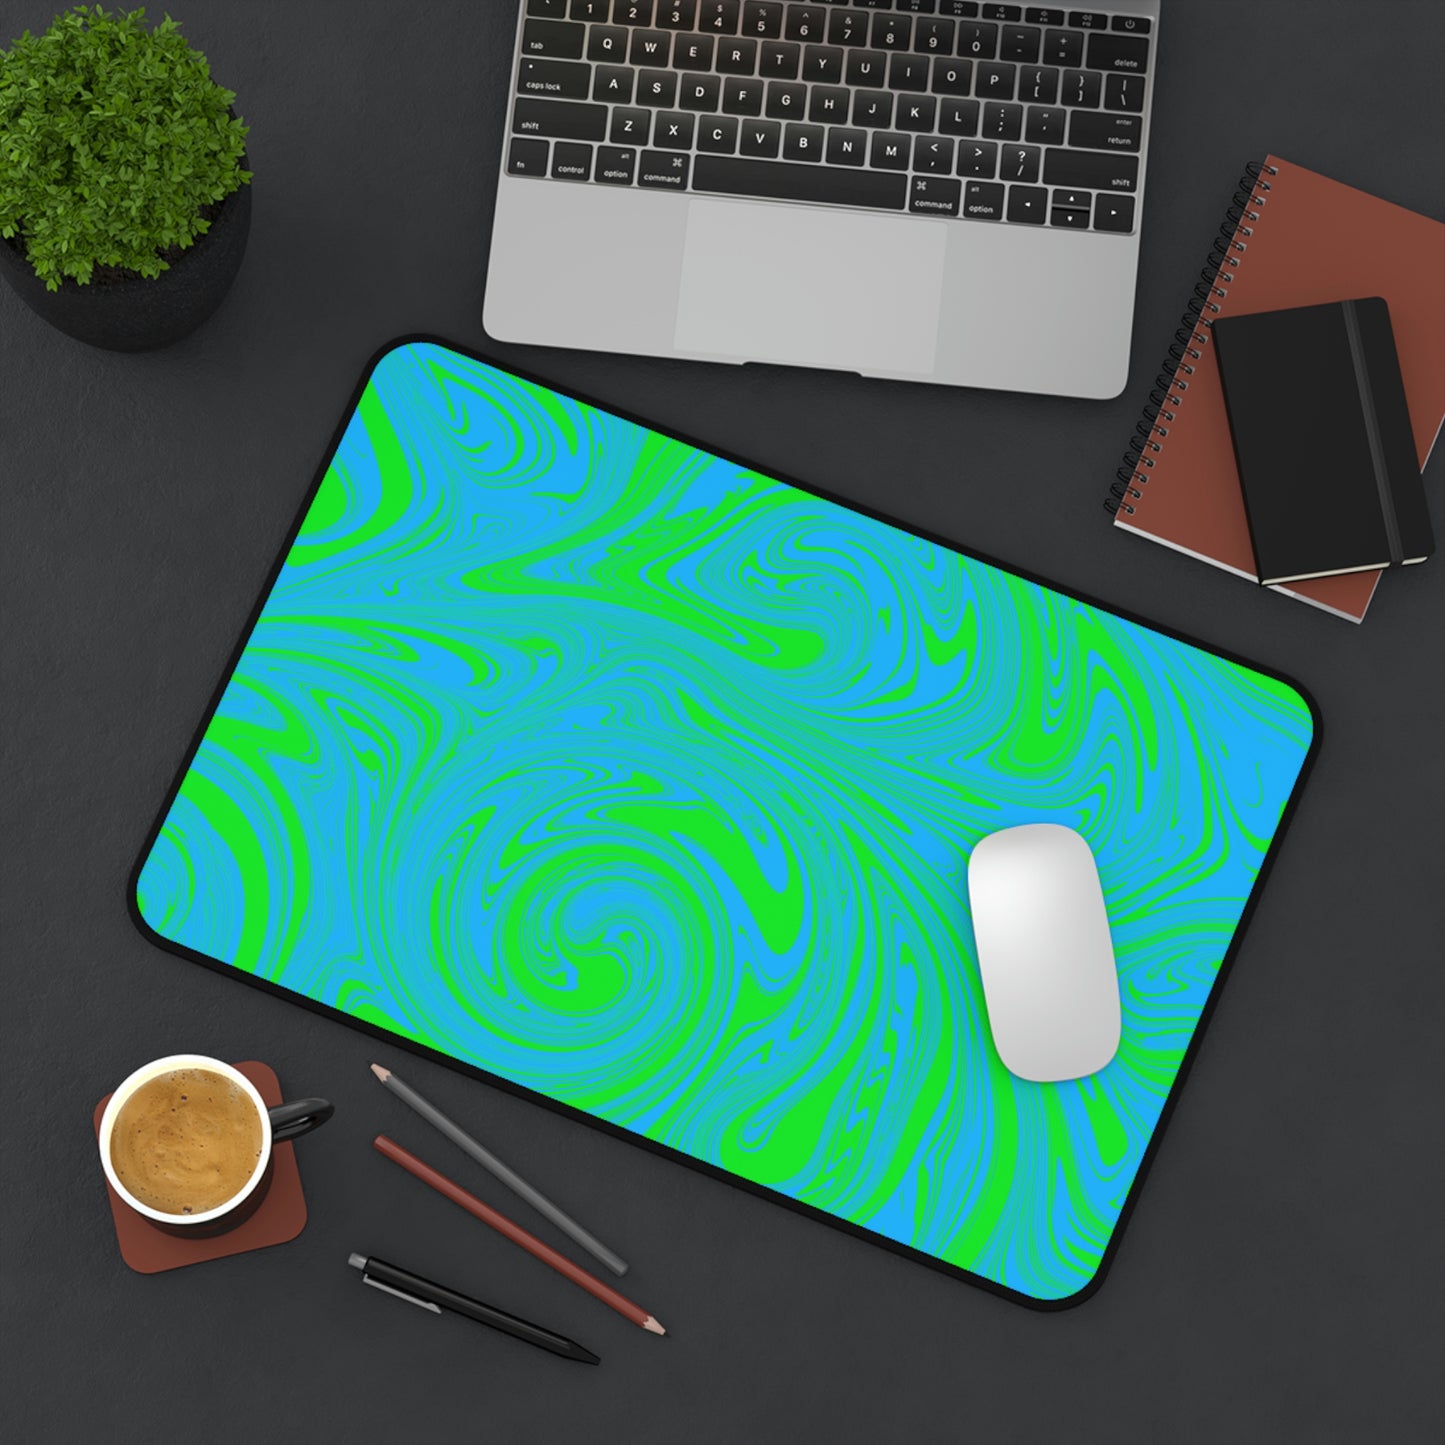 A 12" x 18" desk mat with blue and green swirls sitting at an angle.